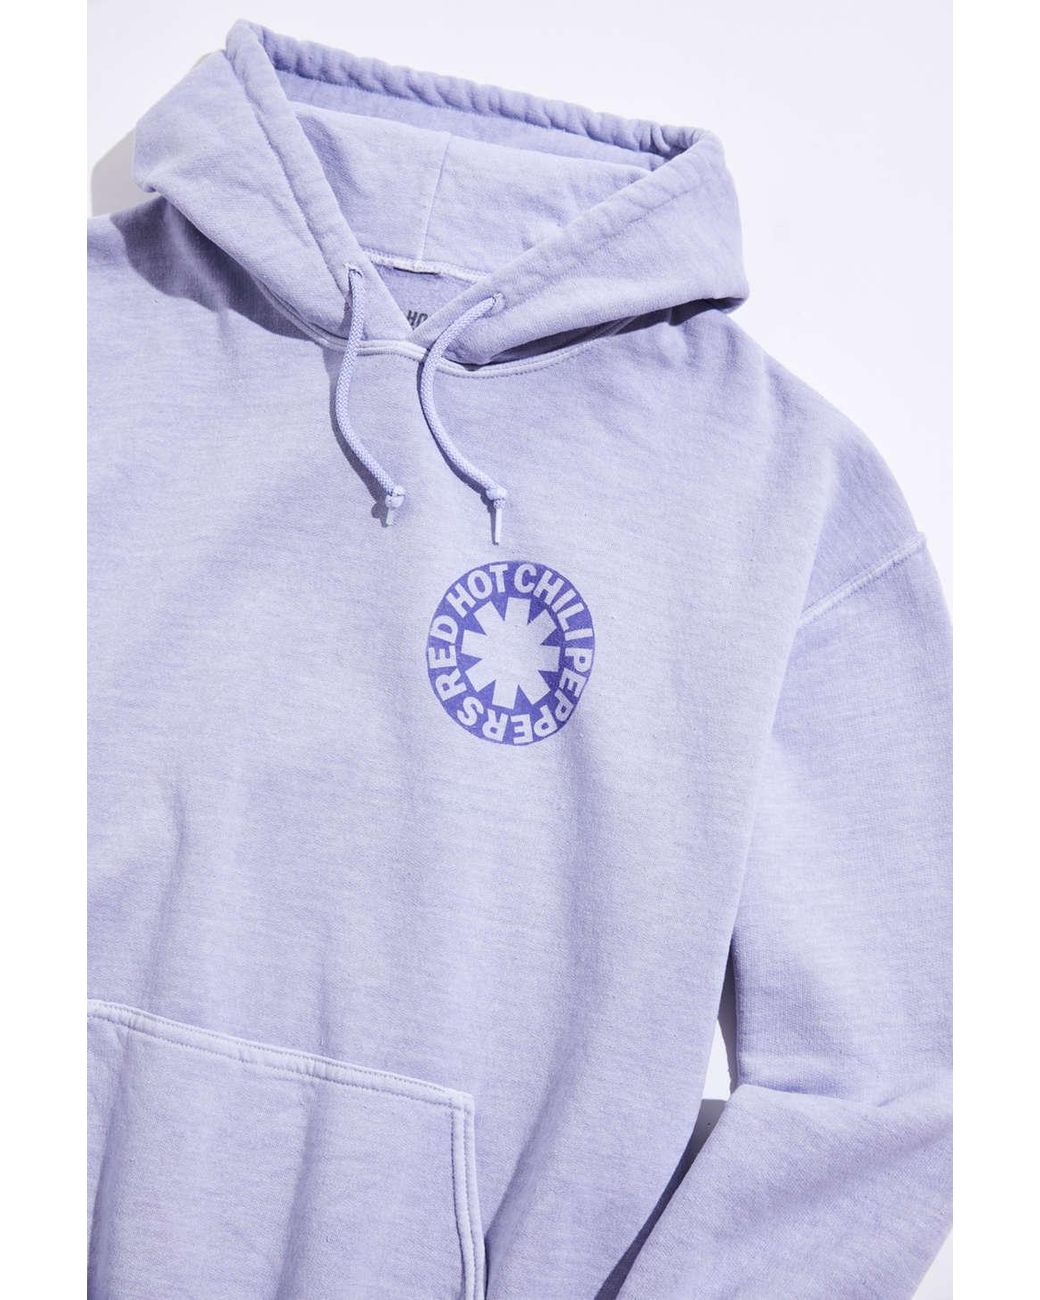 Urban Outfitters Red Hot Chili Peppers Hoodie Sweatshirt in Blue